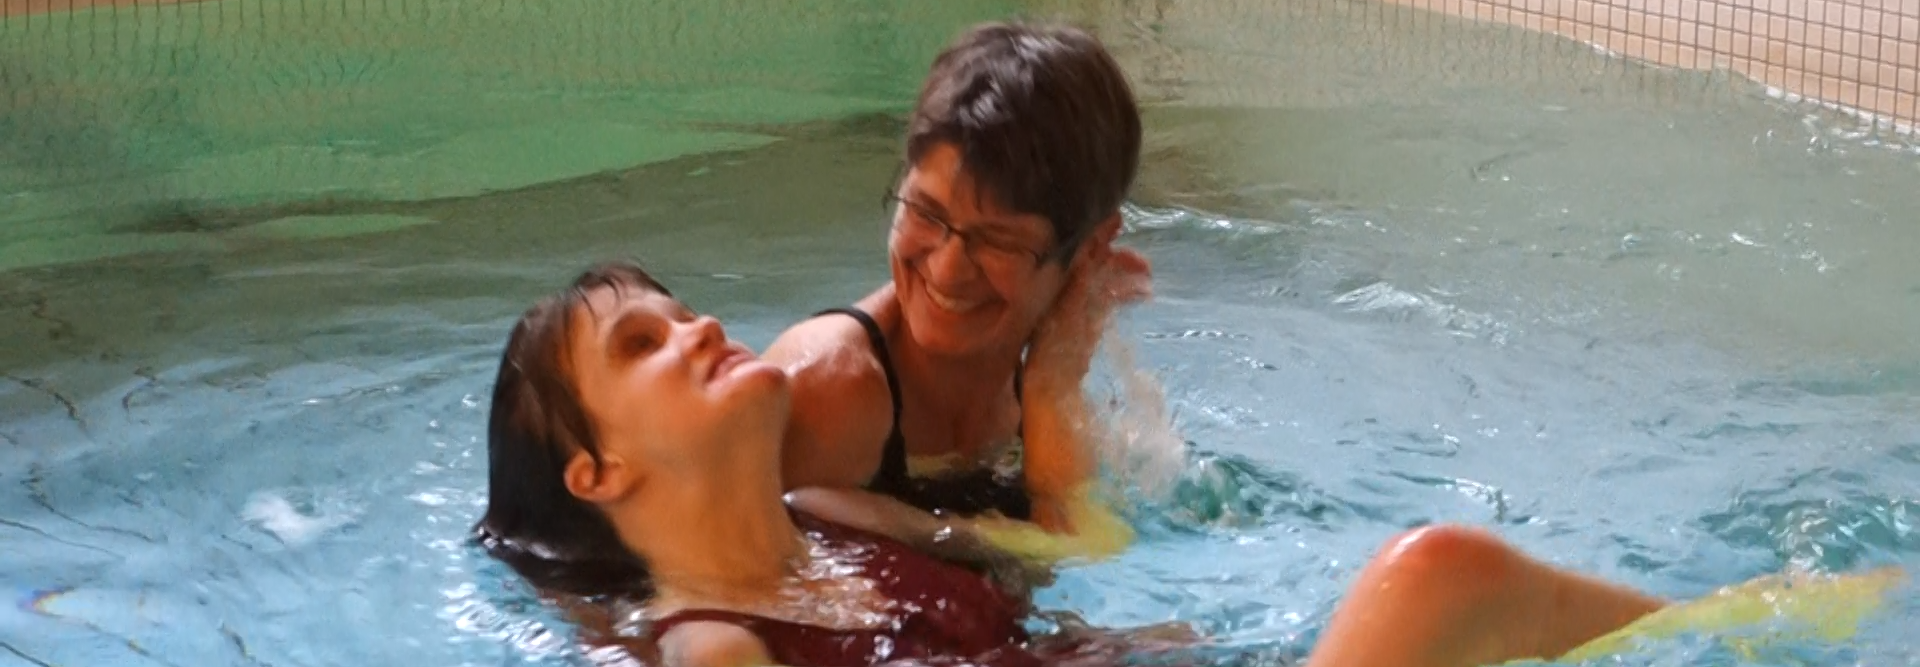 Younger woman swims on her back, supported by the physiotherapist, in the therapy pool of Tanne. The scene is characterized by the warm, mindful attention between the two women.